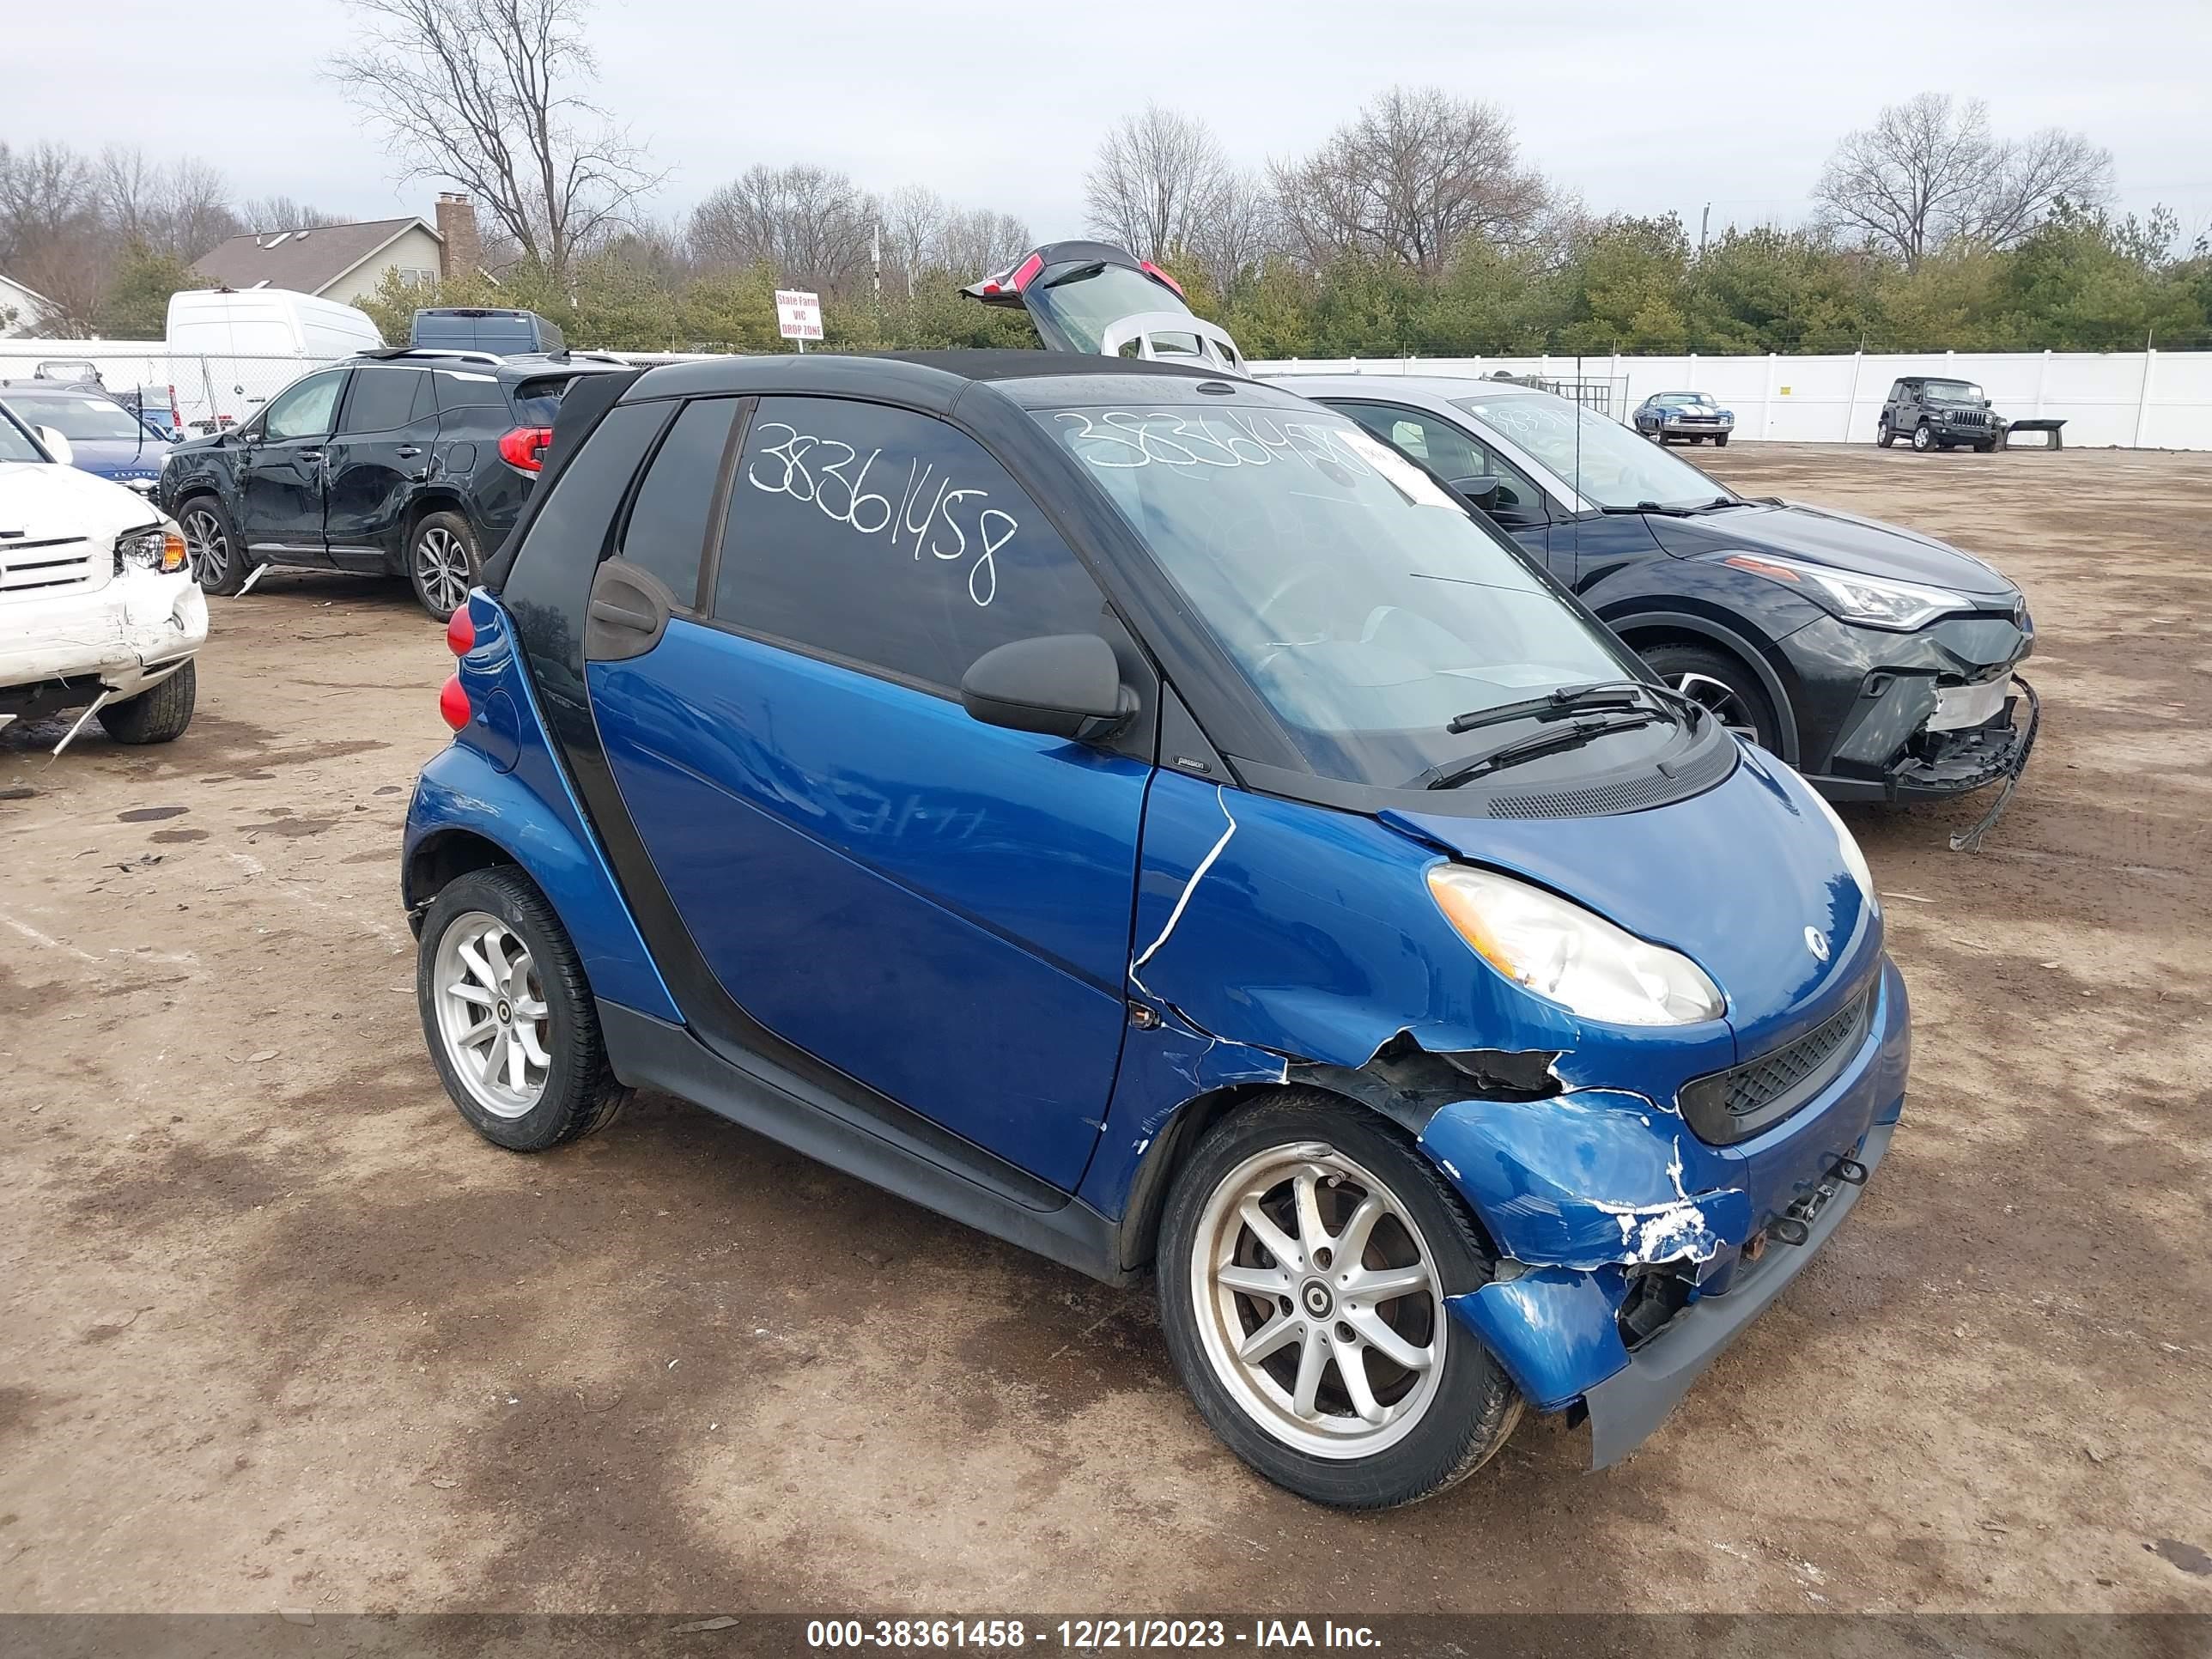 vin: WMEEK31X09K259006 WMEEK31X09K259006 2009 smart fortwo 1000 for Sale in 46619, 25631 State Road 2, South Bend, USA